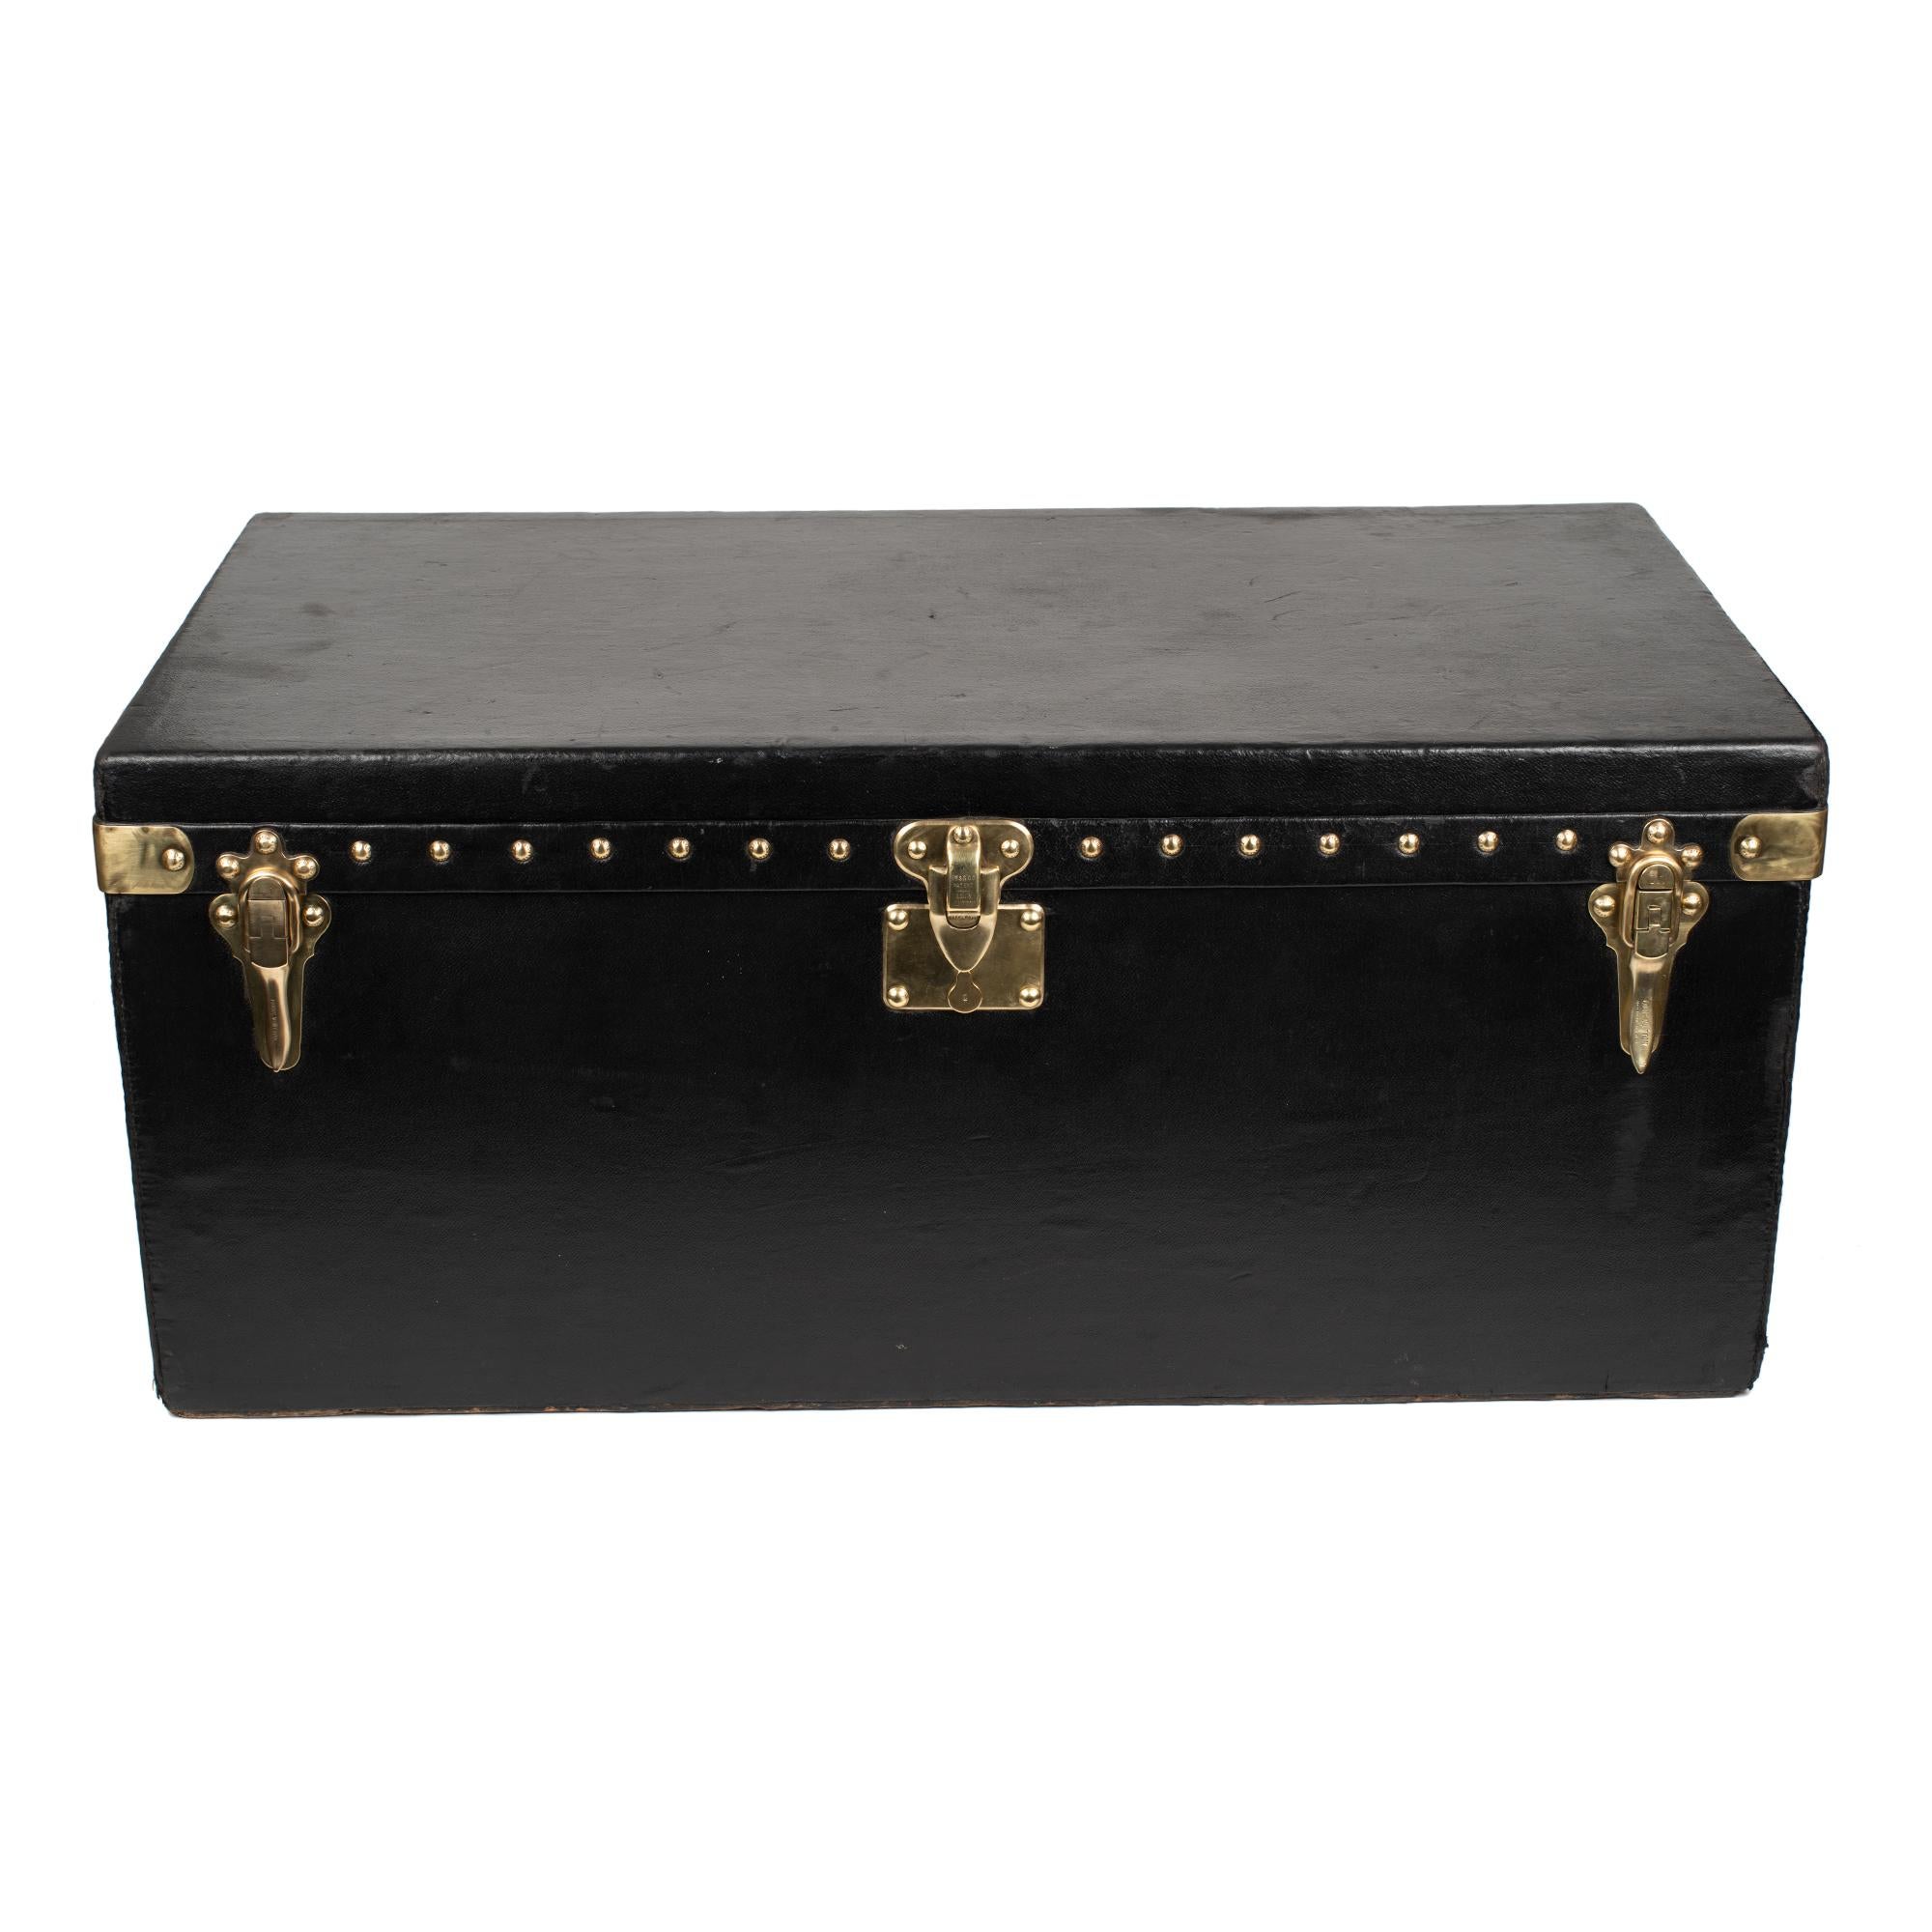 LOUIS VUITTON
Wooden trunk covered with black studded coated fabric.
Fittings made of brass.
Lock system and nails marked and monogrammed LOUIS VUITTON.
The interior of the trunk has been lined.
Curved rear shape marrying the car’s bulge.
Early 20th